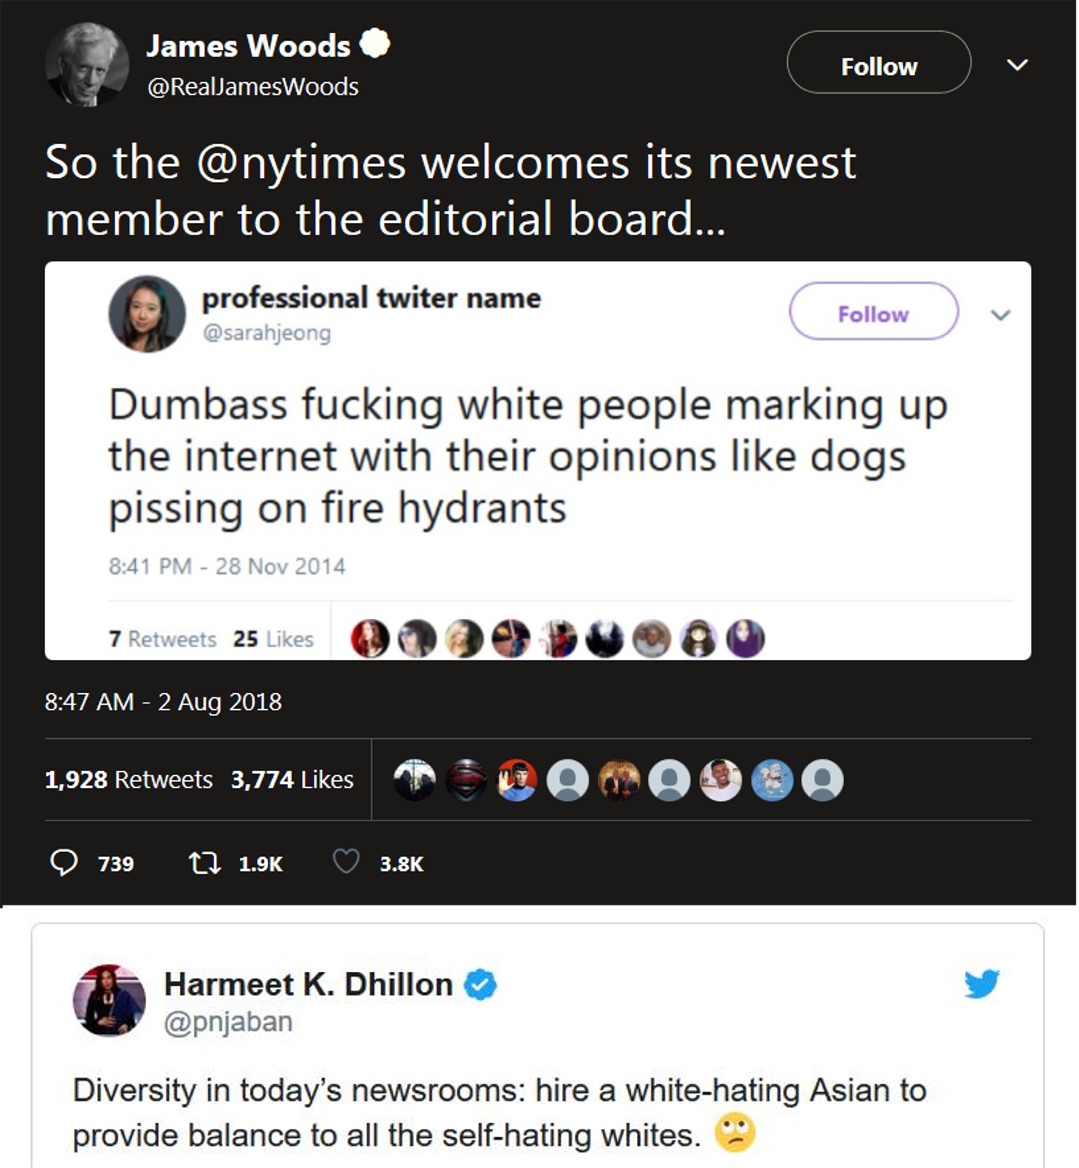 screenshot - James Woods Woods So the welcomes its newest member to the editorial board... professional twiter name v Dumbass fucking white people marking up the internet with their opinions dogs pissing on fire hydrants 7 25 00905 0 7 25 1,928 3,774 1 00